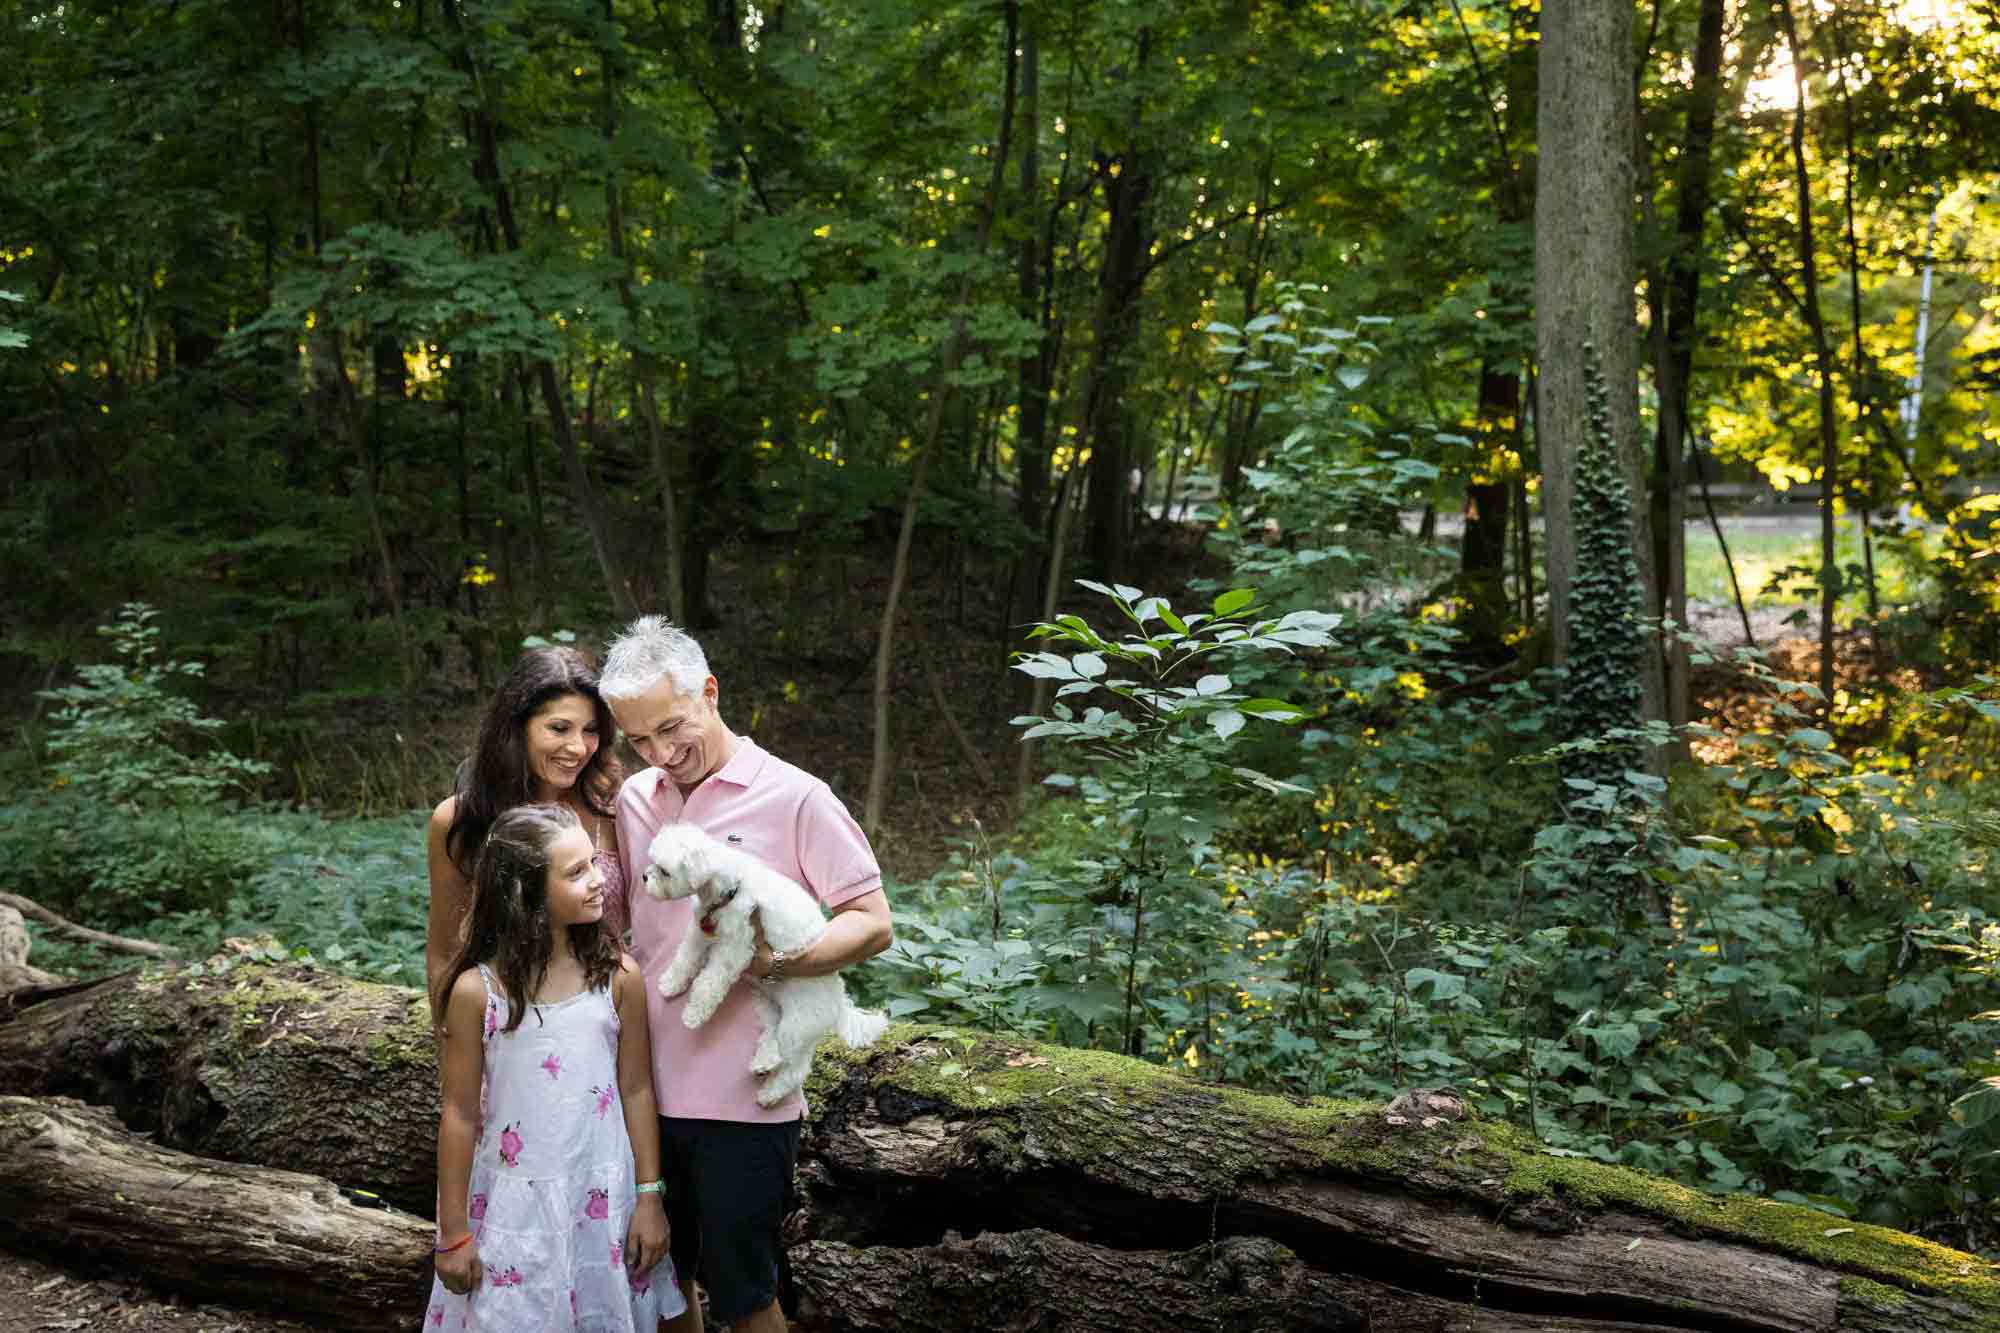 Parents and young girl focused on small white dog with log in the background during Forest Hills family portrait